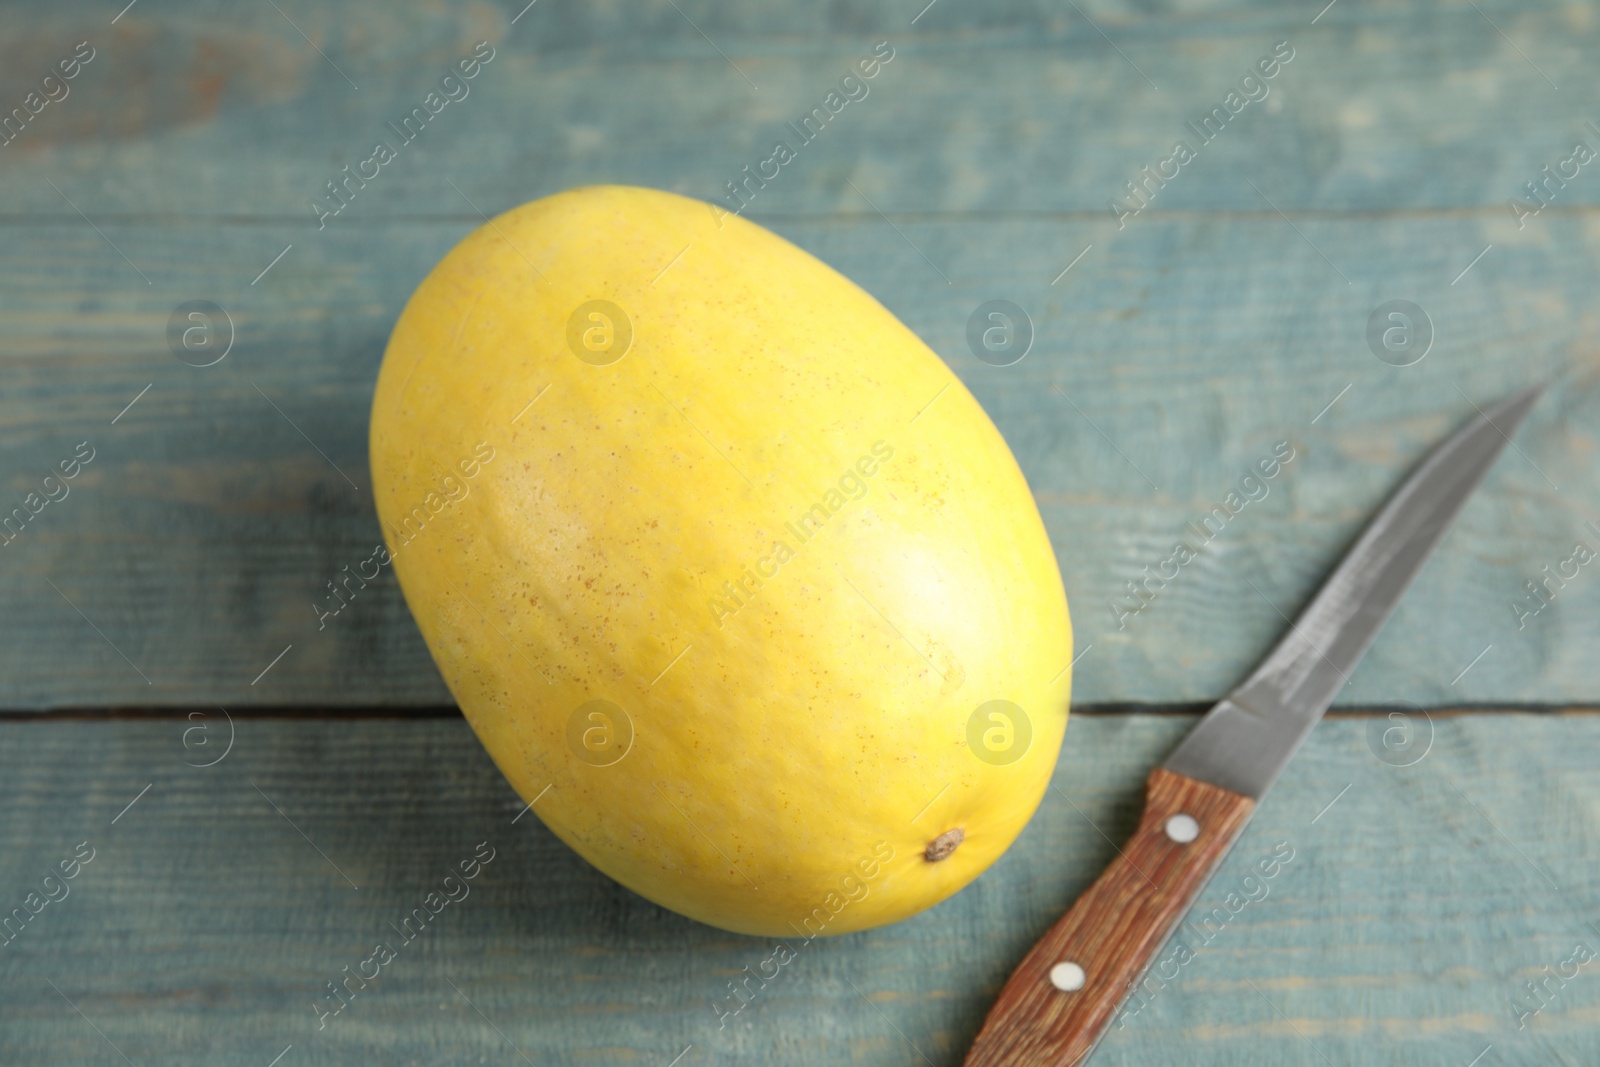 Photo of Ripe spaghetti squash and knife on wooden table